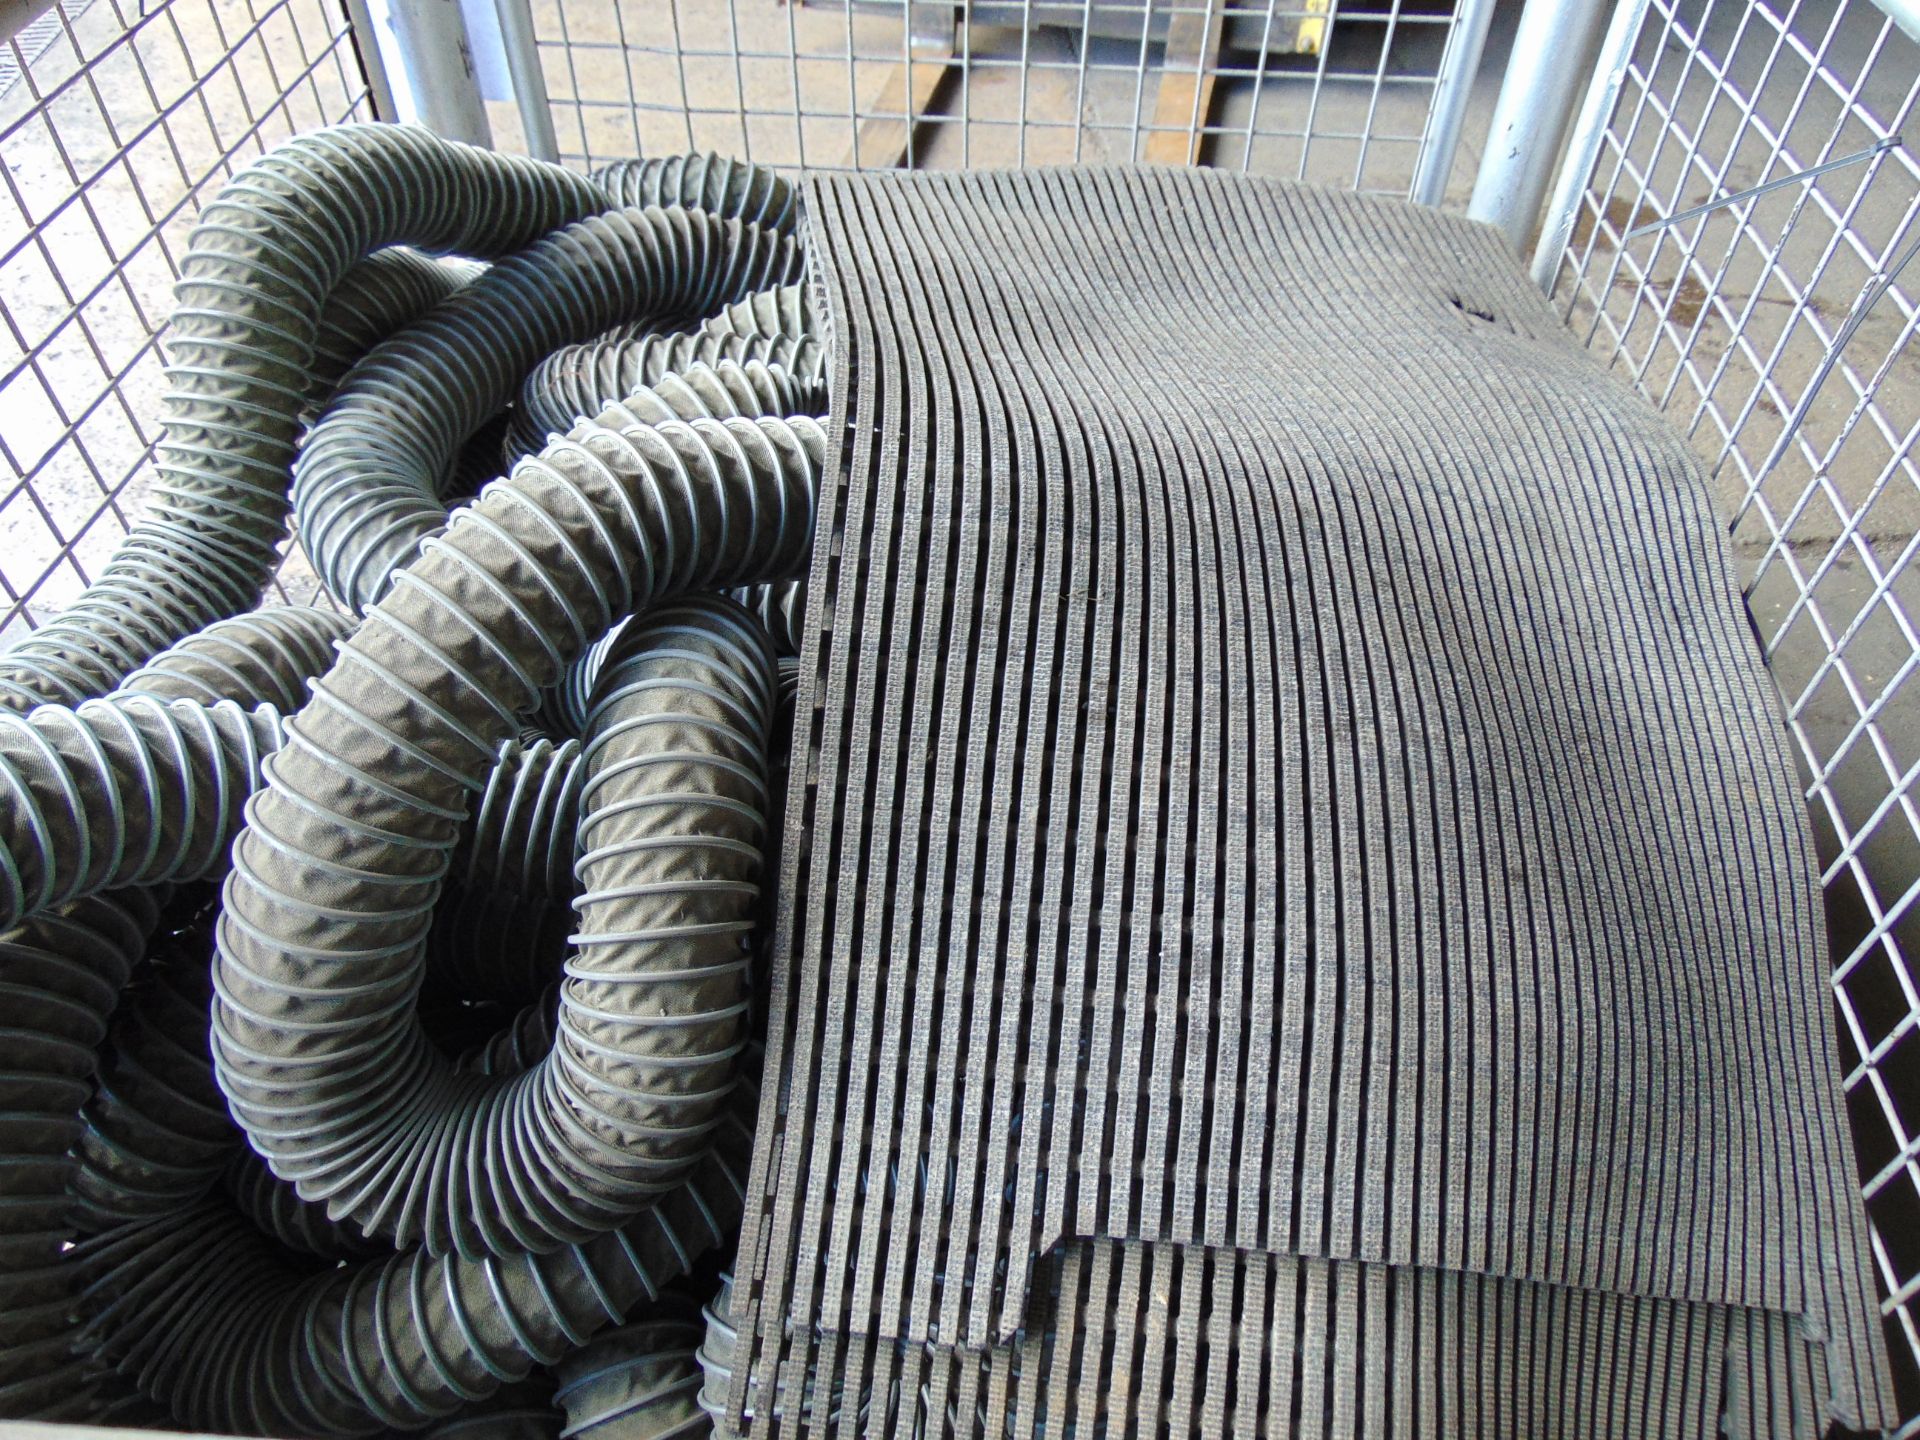 1 x Stillage of Flexible Hoses and Vehicle Floor Mats - Image 4 of 5